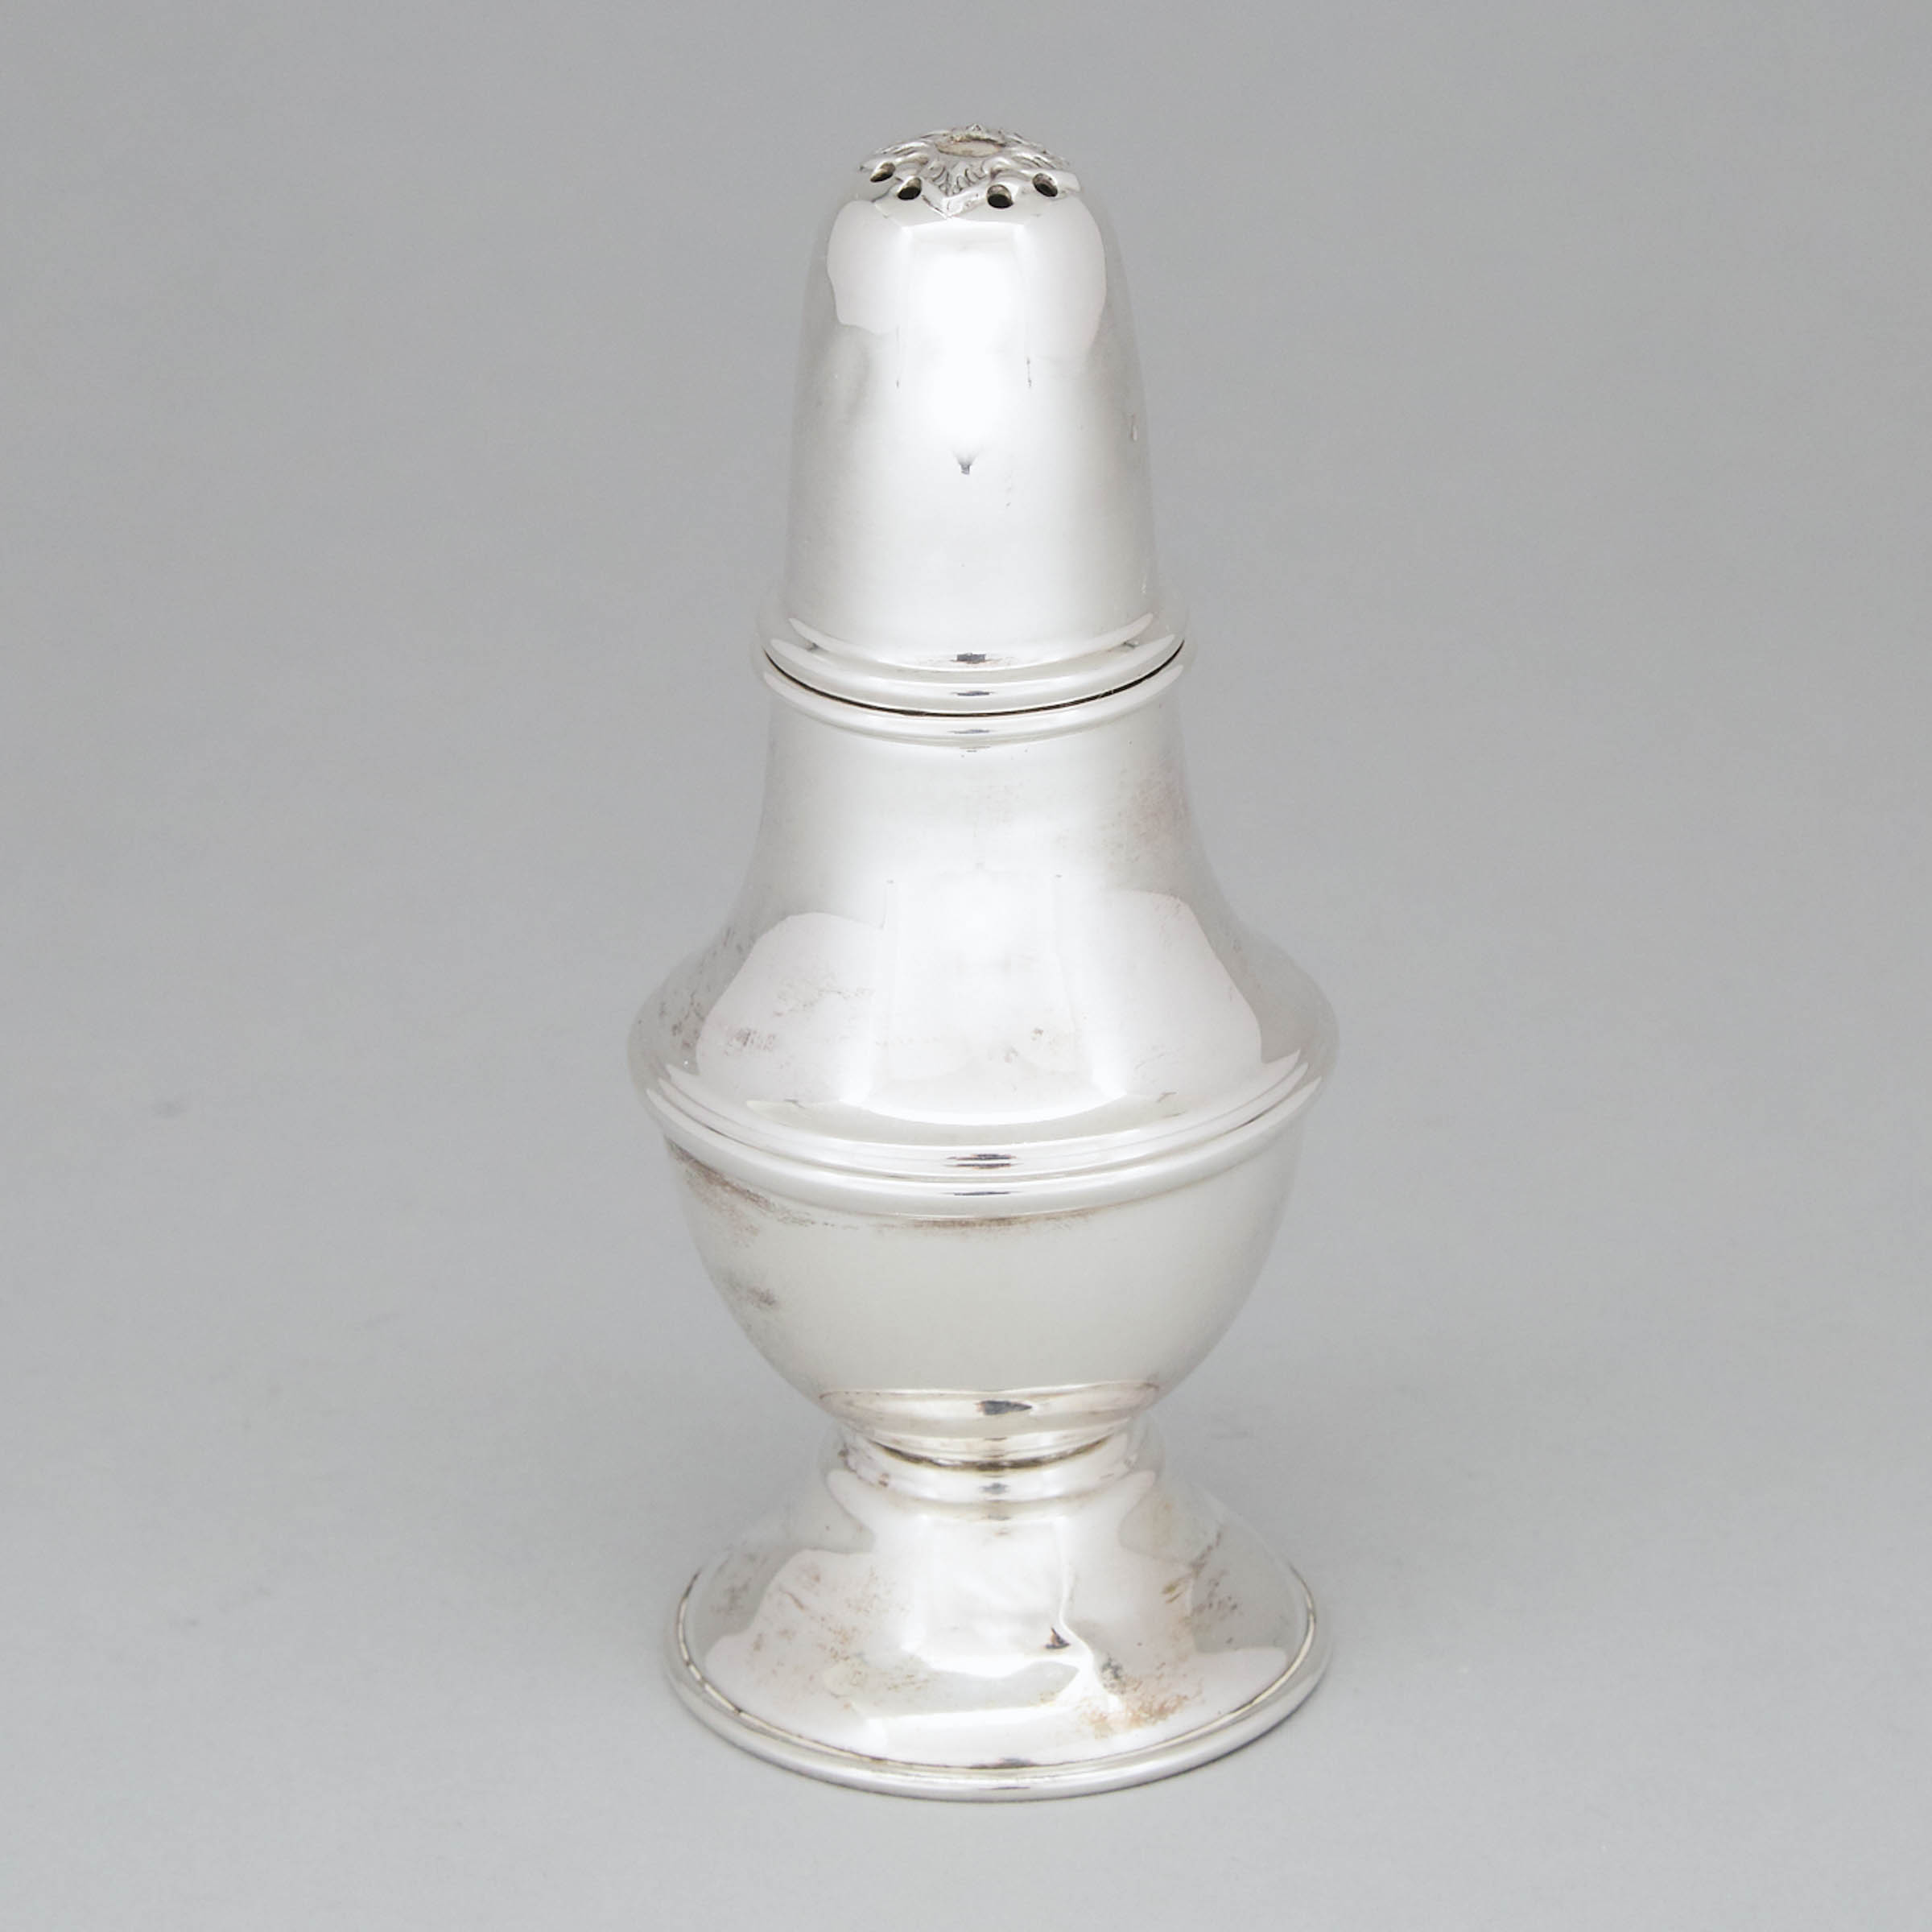 Canadian Silver Sugar Caster, Poul Petersen, Montreal, Que., mid-20th century